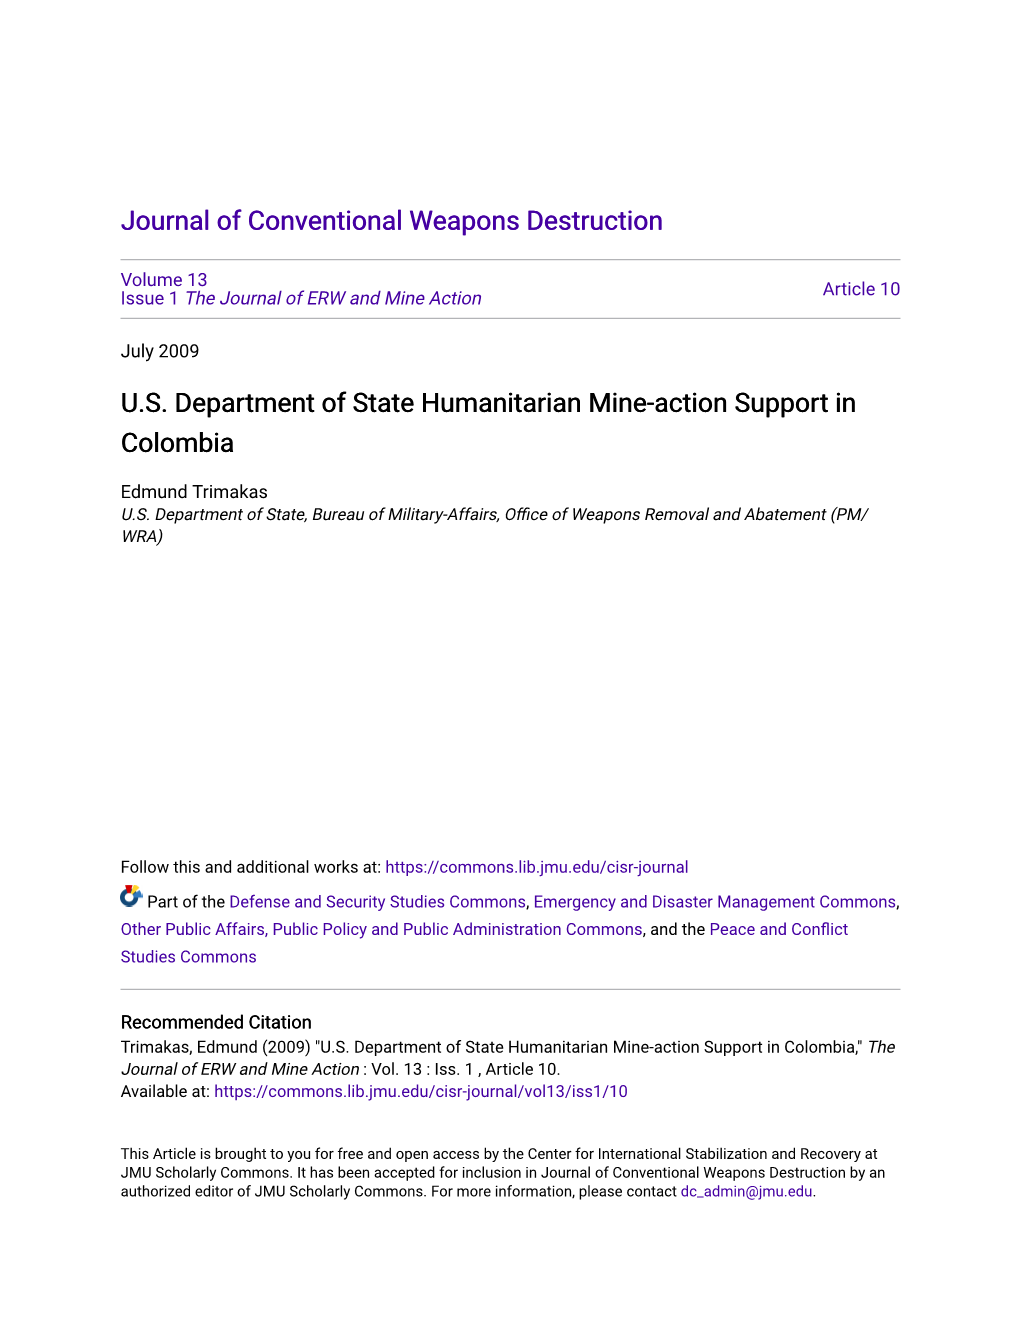 U.S. Department of State Humanitarian Mine-Action Support in Colombia